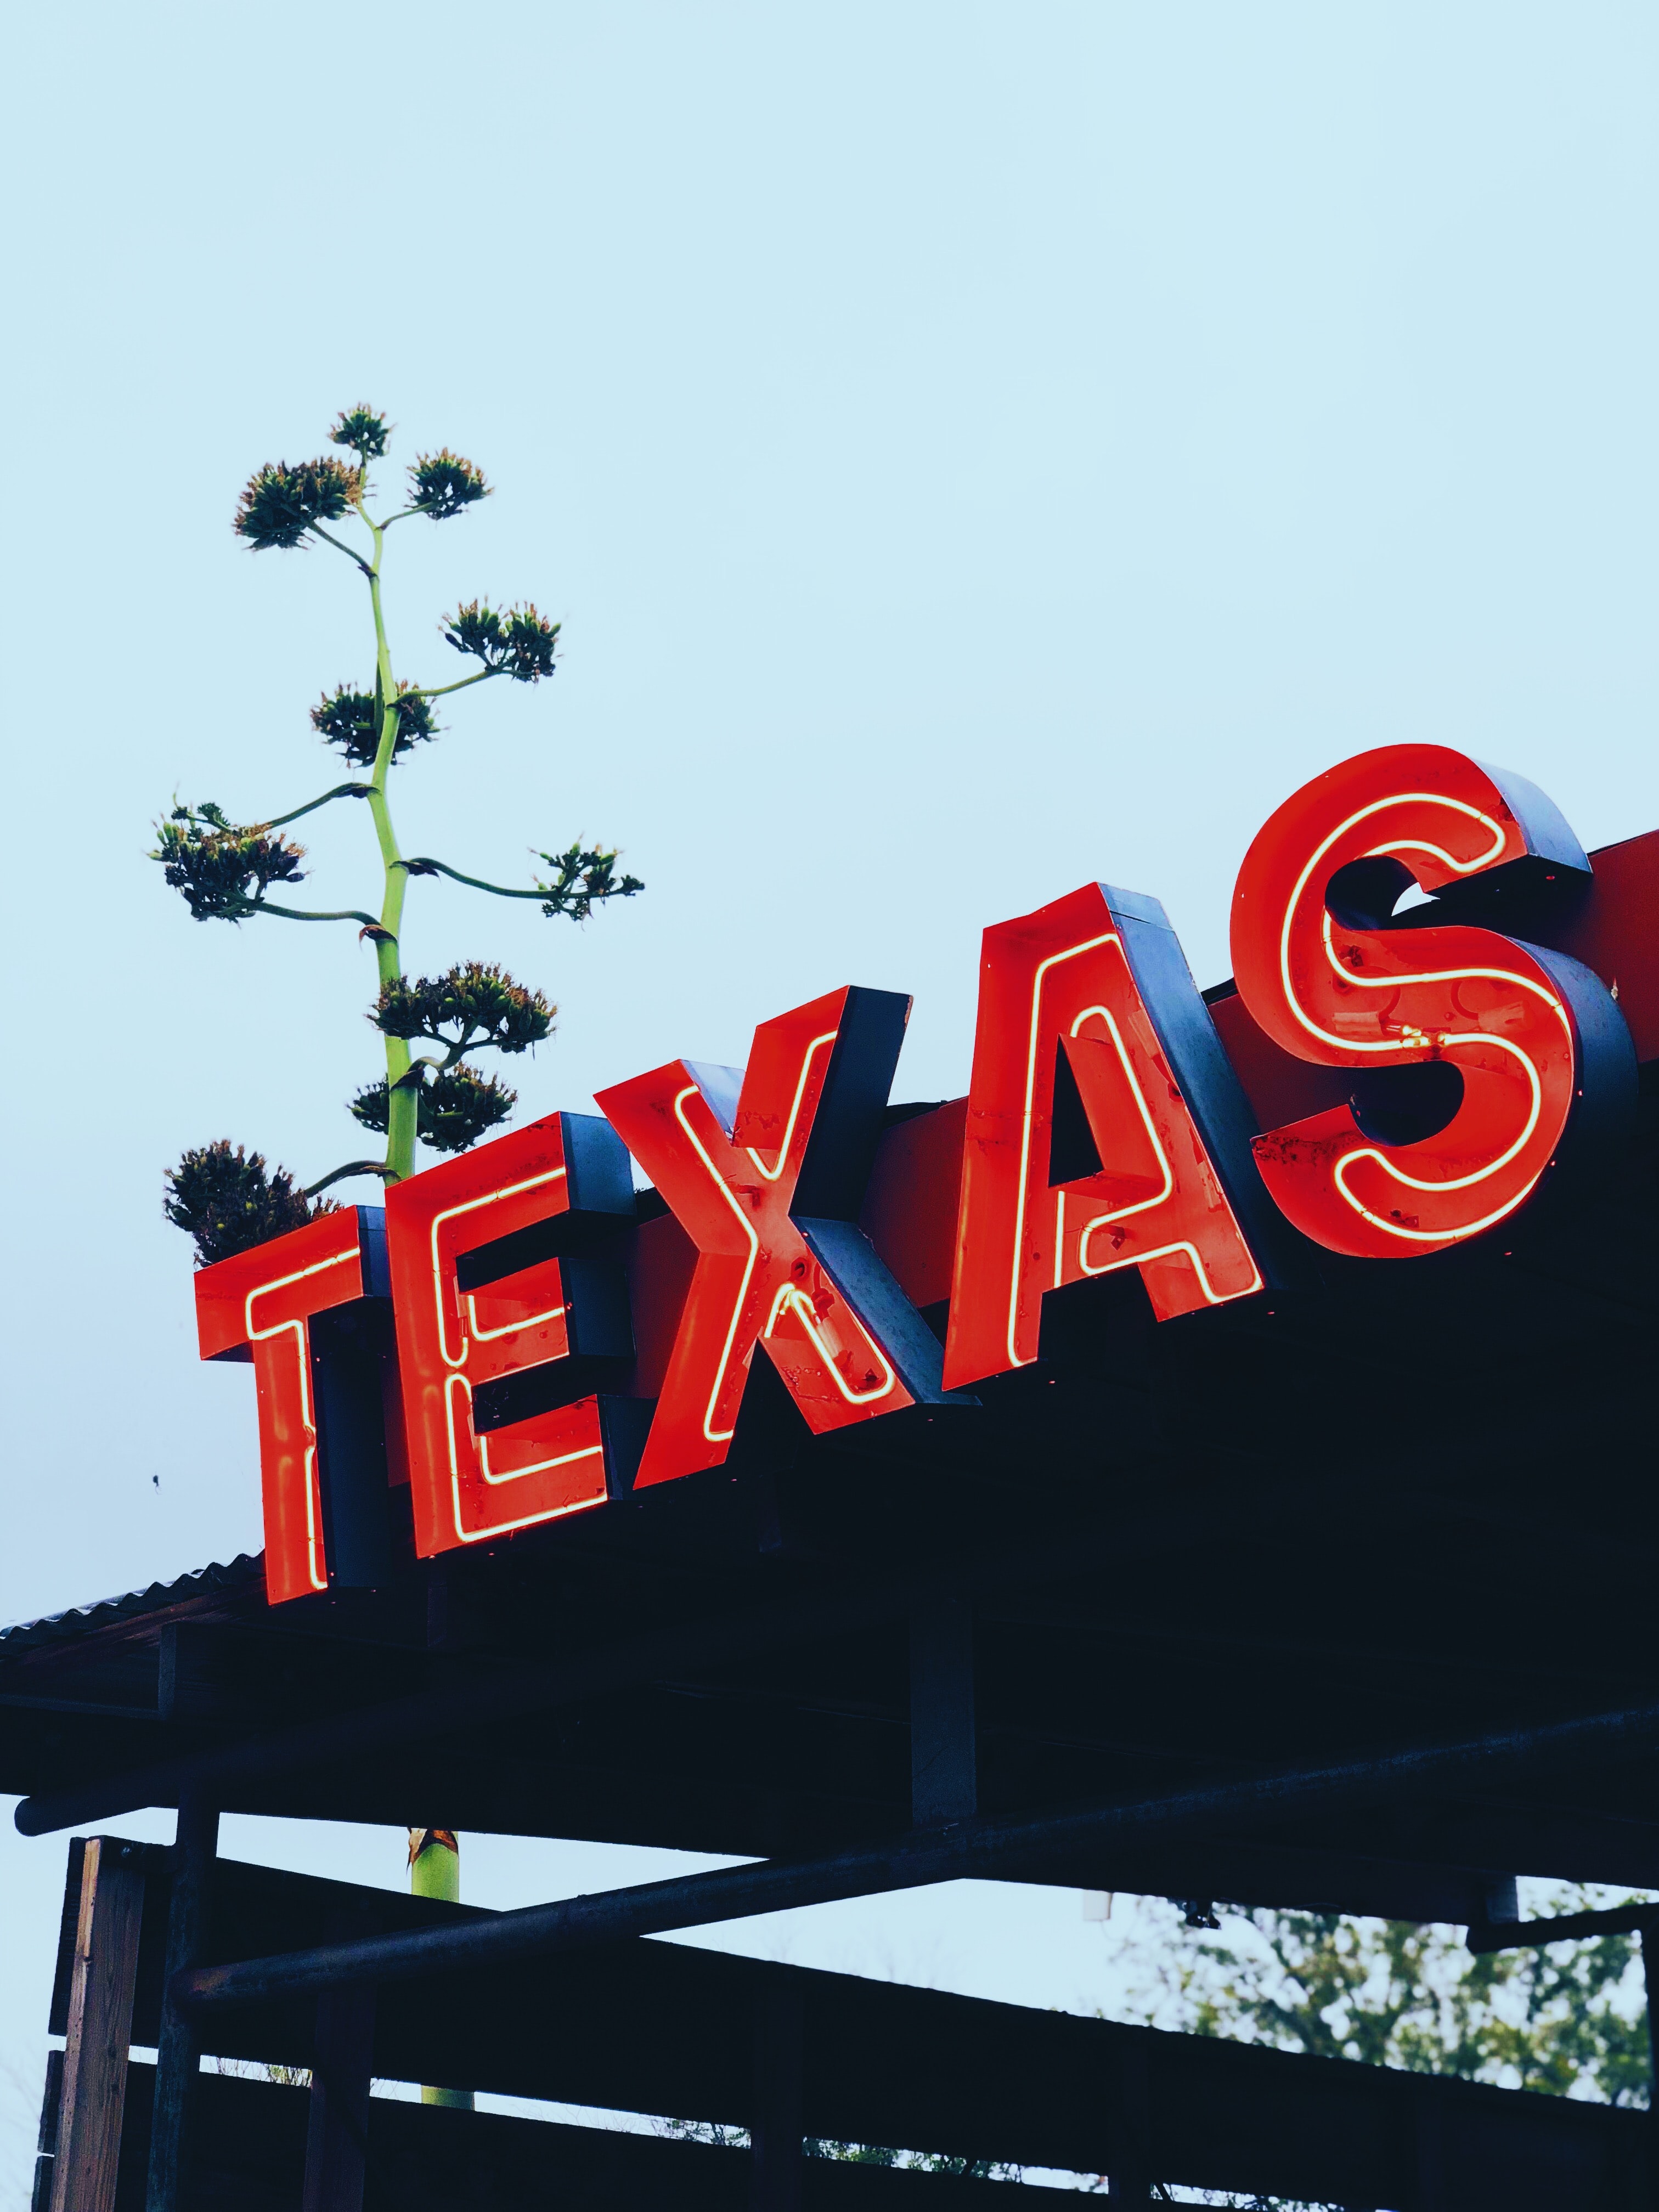 New Survey Finds Strong Support for Regulated Texas Gambling